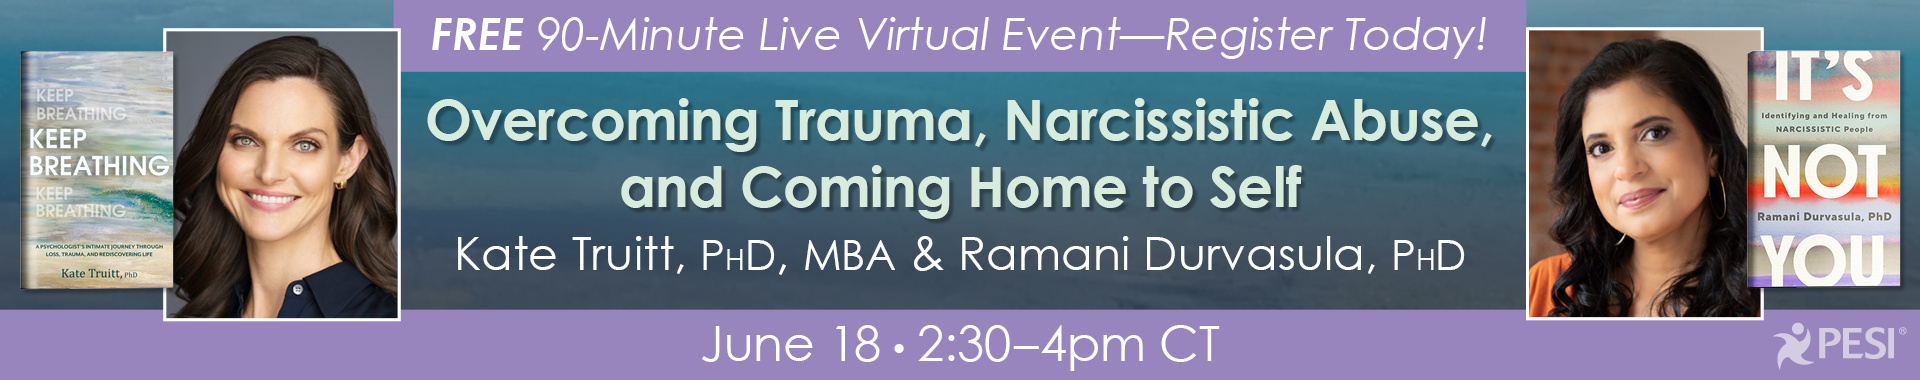 Overcoming Trauma, Narcissistic Abuse, and Coming Home to Self